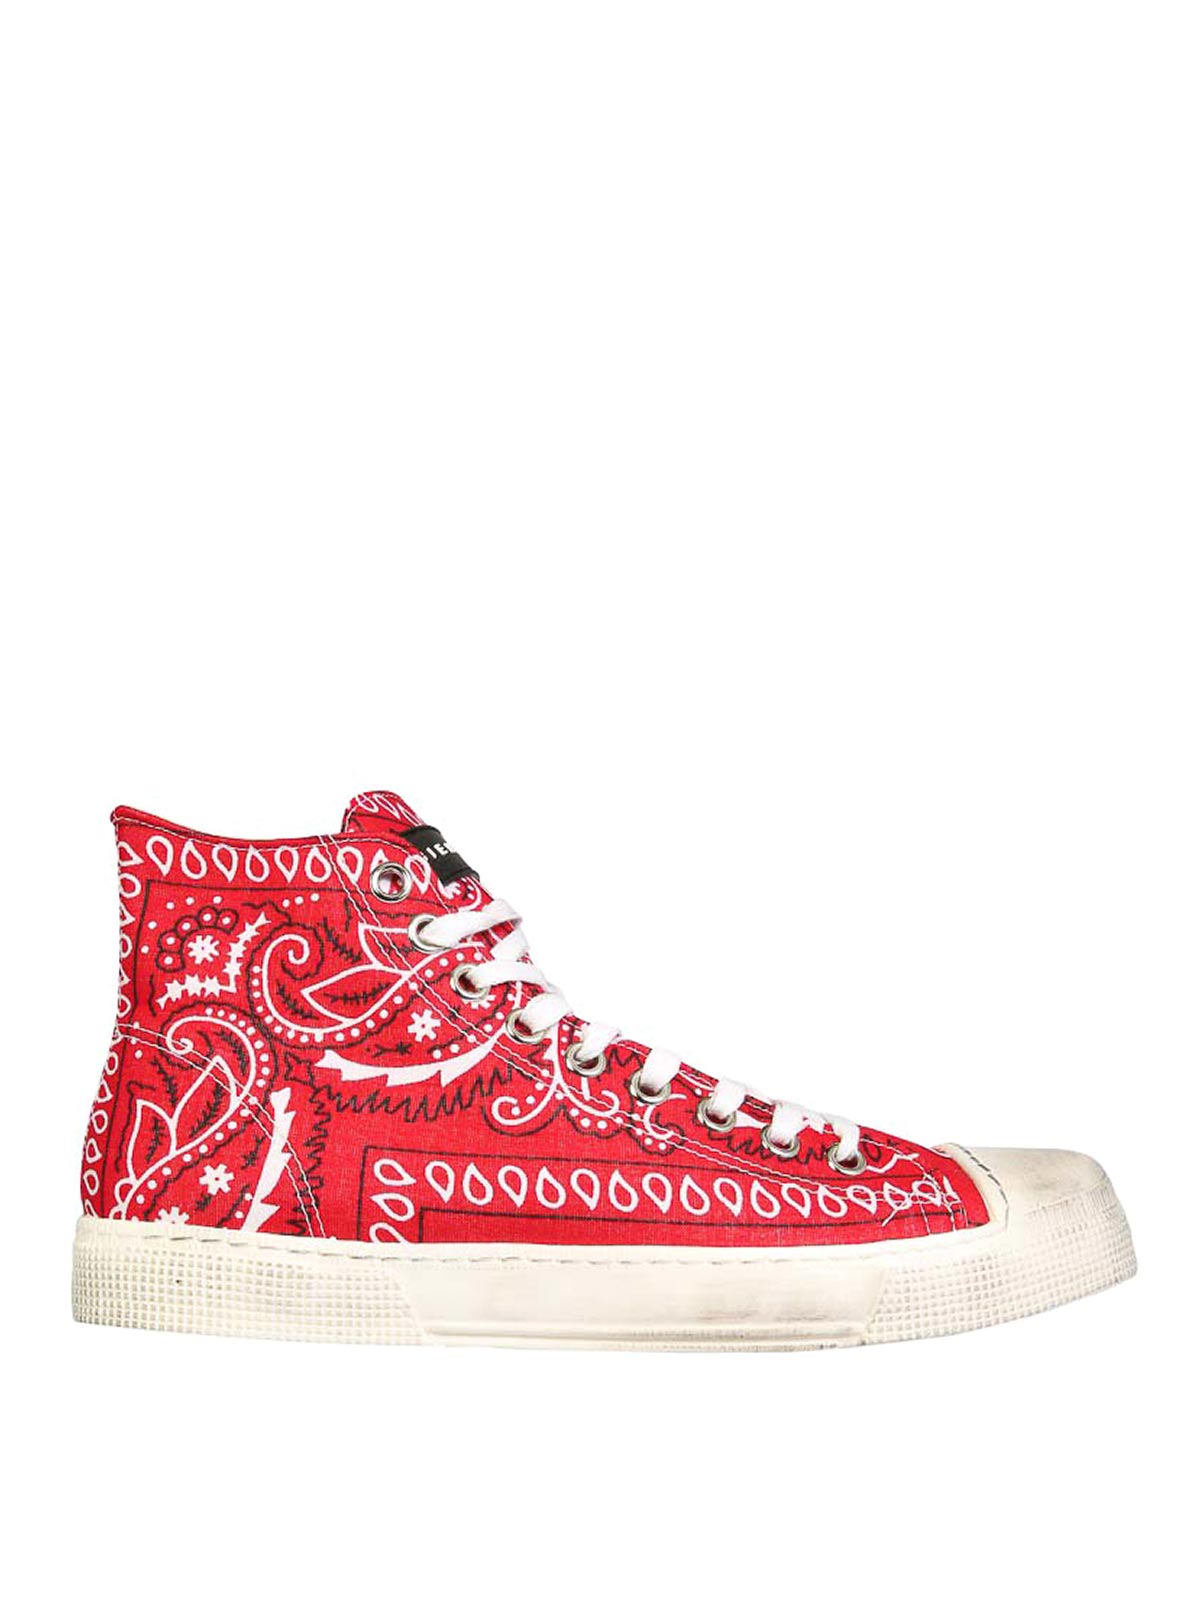 Shop Gienchi High Jean Michel Sneakers In Red